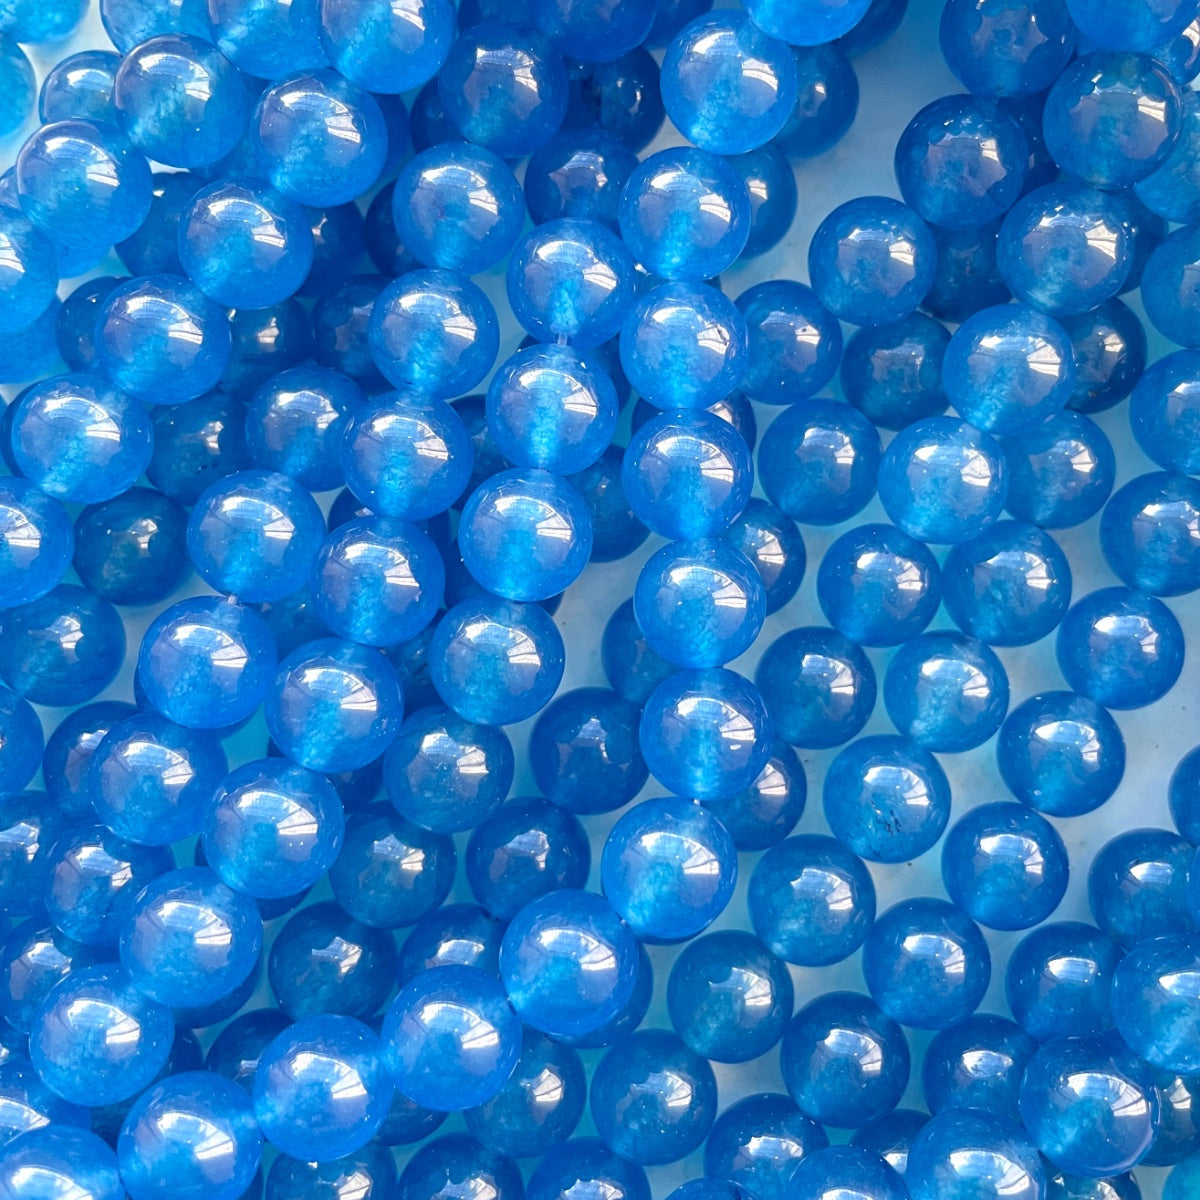 2 Strands/lot 10mm Colorful Candy Color Jade Stone Round Beads Blue Stone Beads New Beads Arrivals Round Jade Beads Charms Beads Beyond